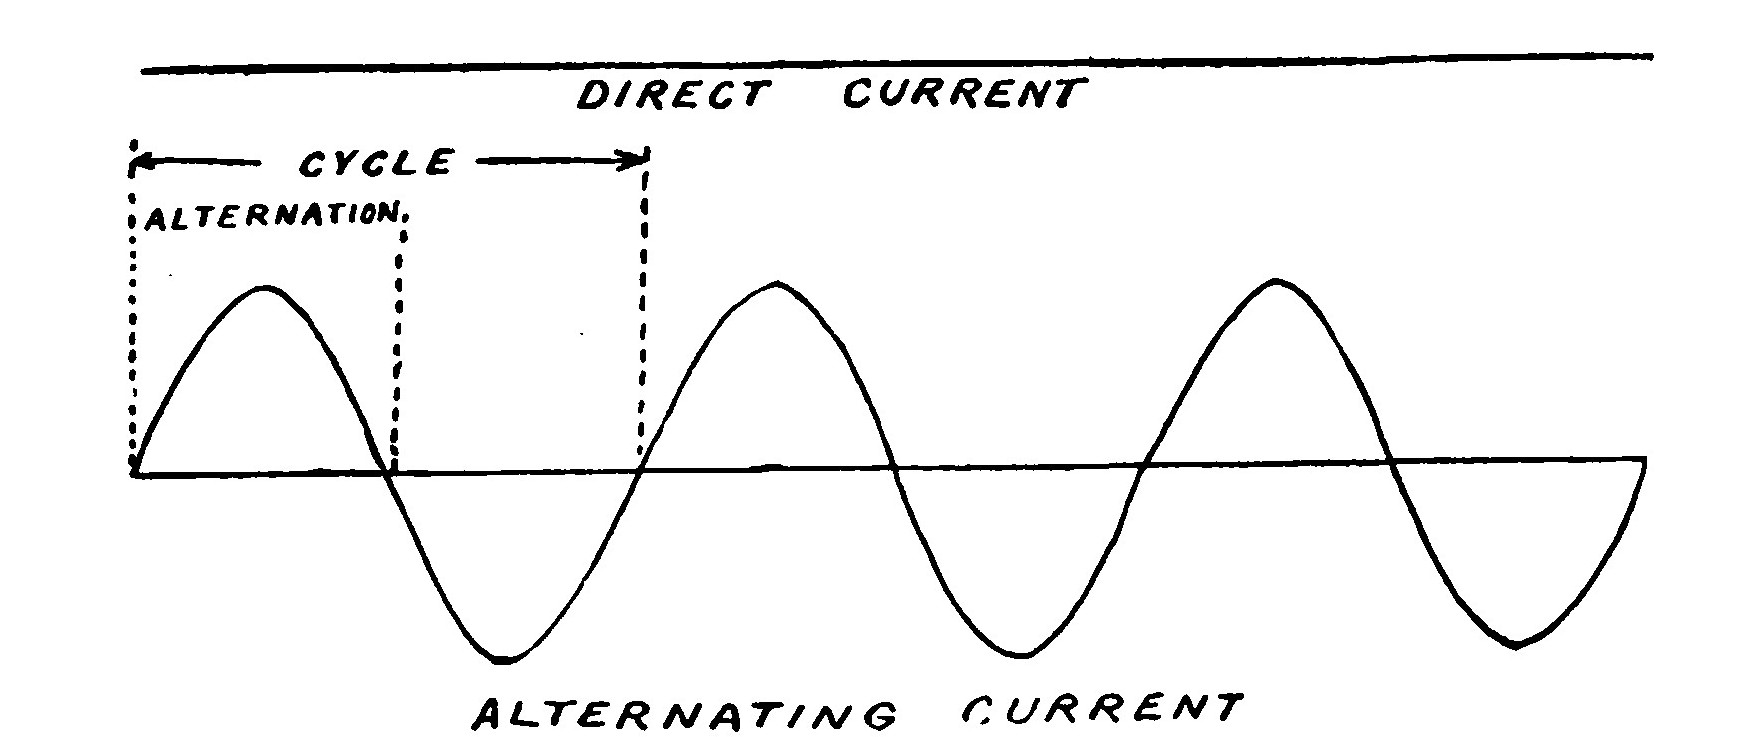 FIG. 12. Diagram Showing Alternating and Direct Current.